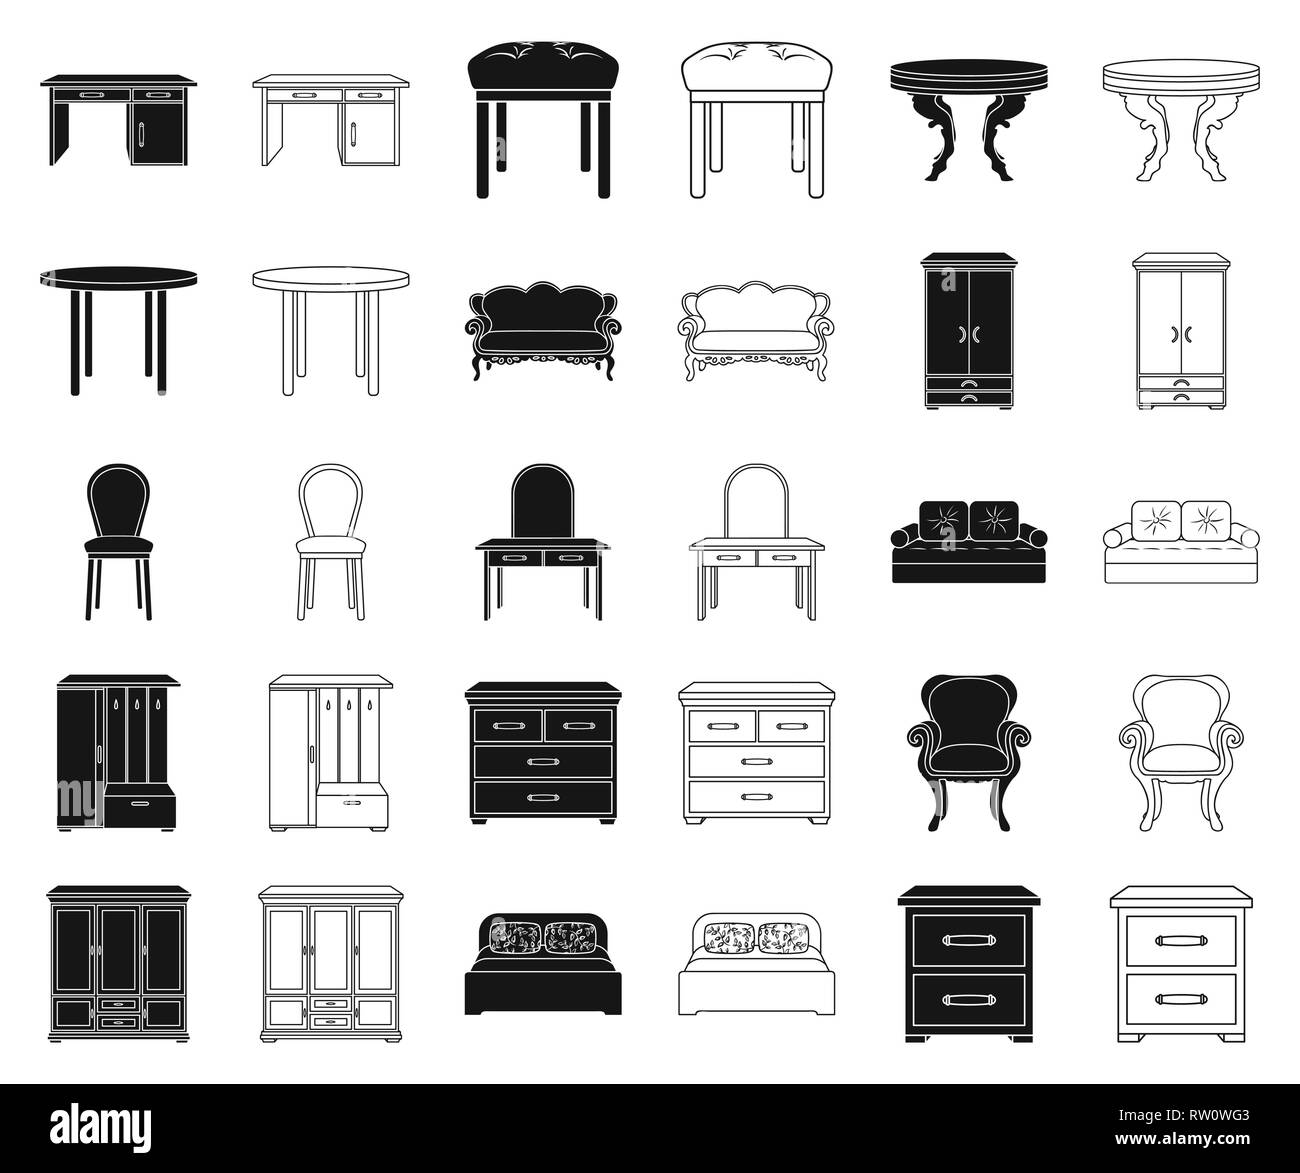 accessory,apartment,armchair,art,back,baroque,bed,bedside,black,outline,cabinet,chair,classical,closet,collection,couch,cupboard,design,desk,double,drawers,dressing,furnishing,furniture,home,house,icon,illustration,interior,isolated,logo,modern,office,retro,round,set,sign,sofa,stool,symbol,table,various,vector,vestibule,vintage,wardrobe,web,wing,wooden Vector Vectors , Stock Vector